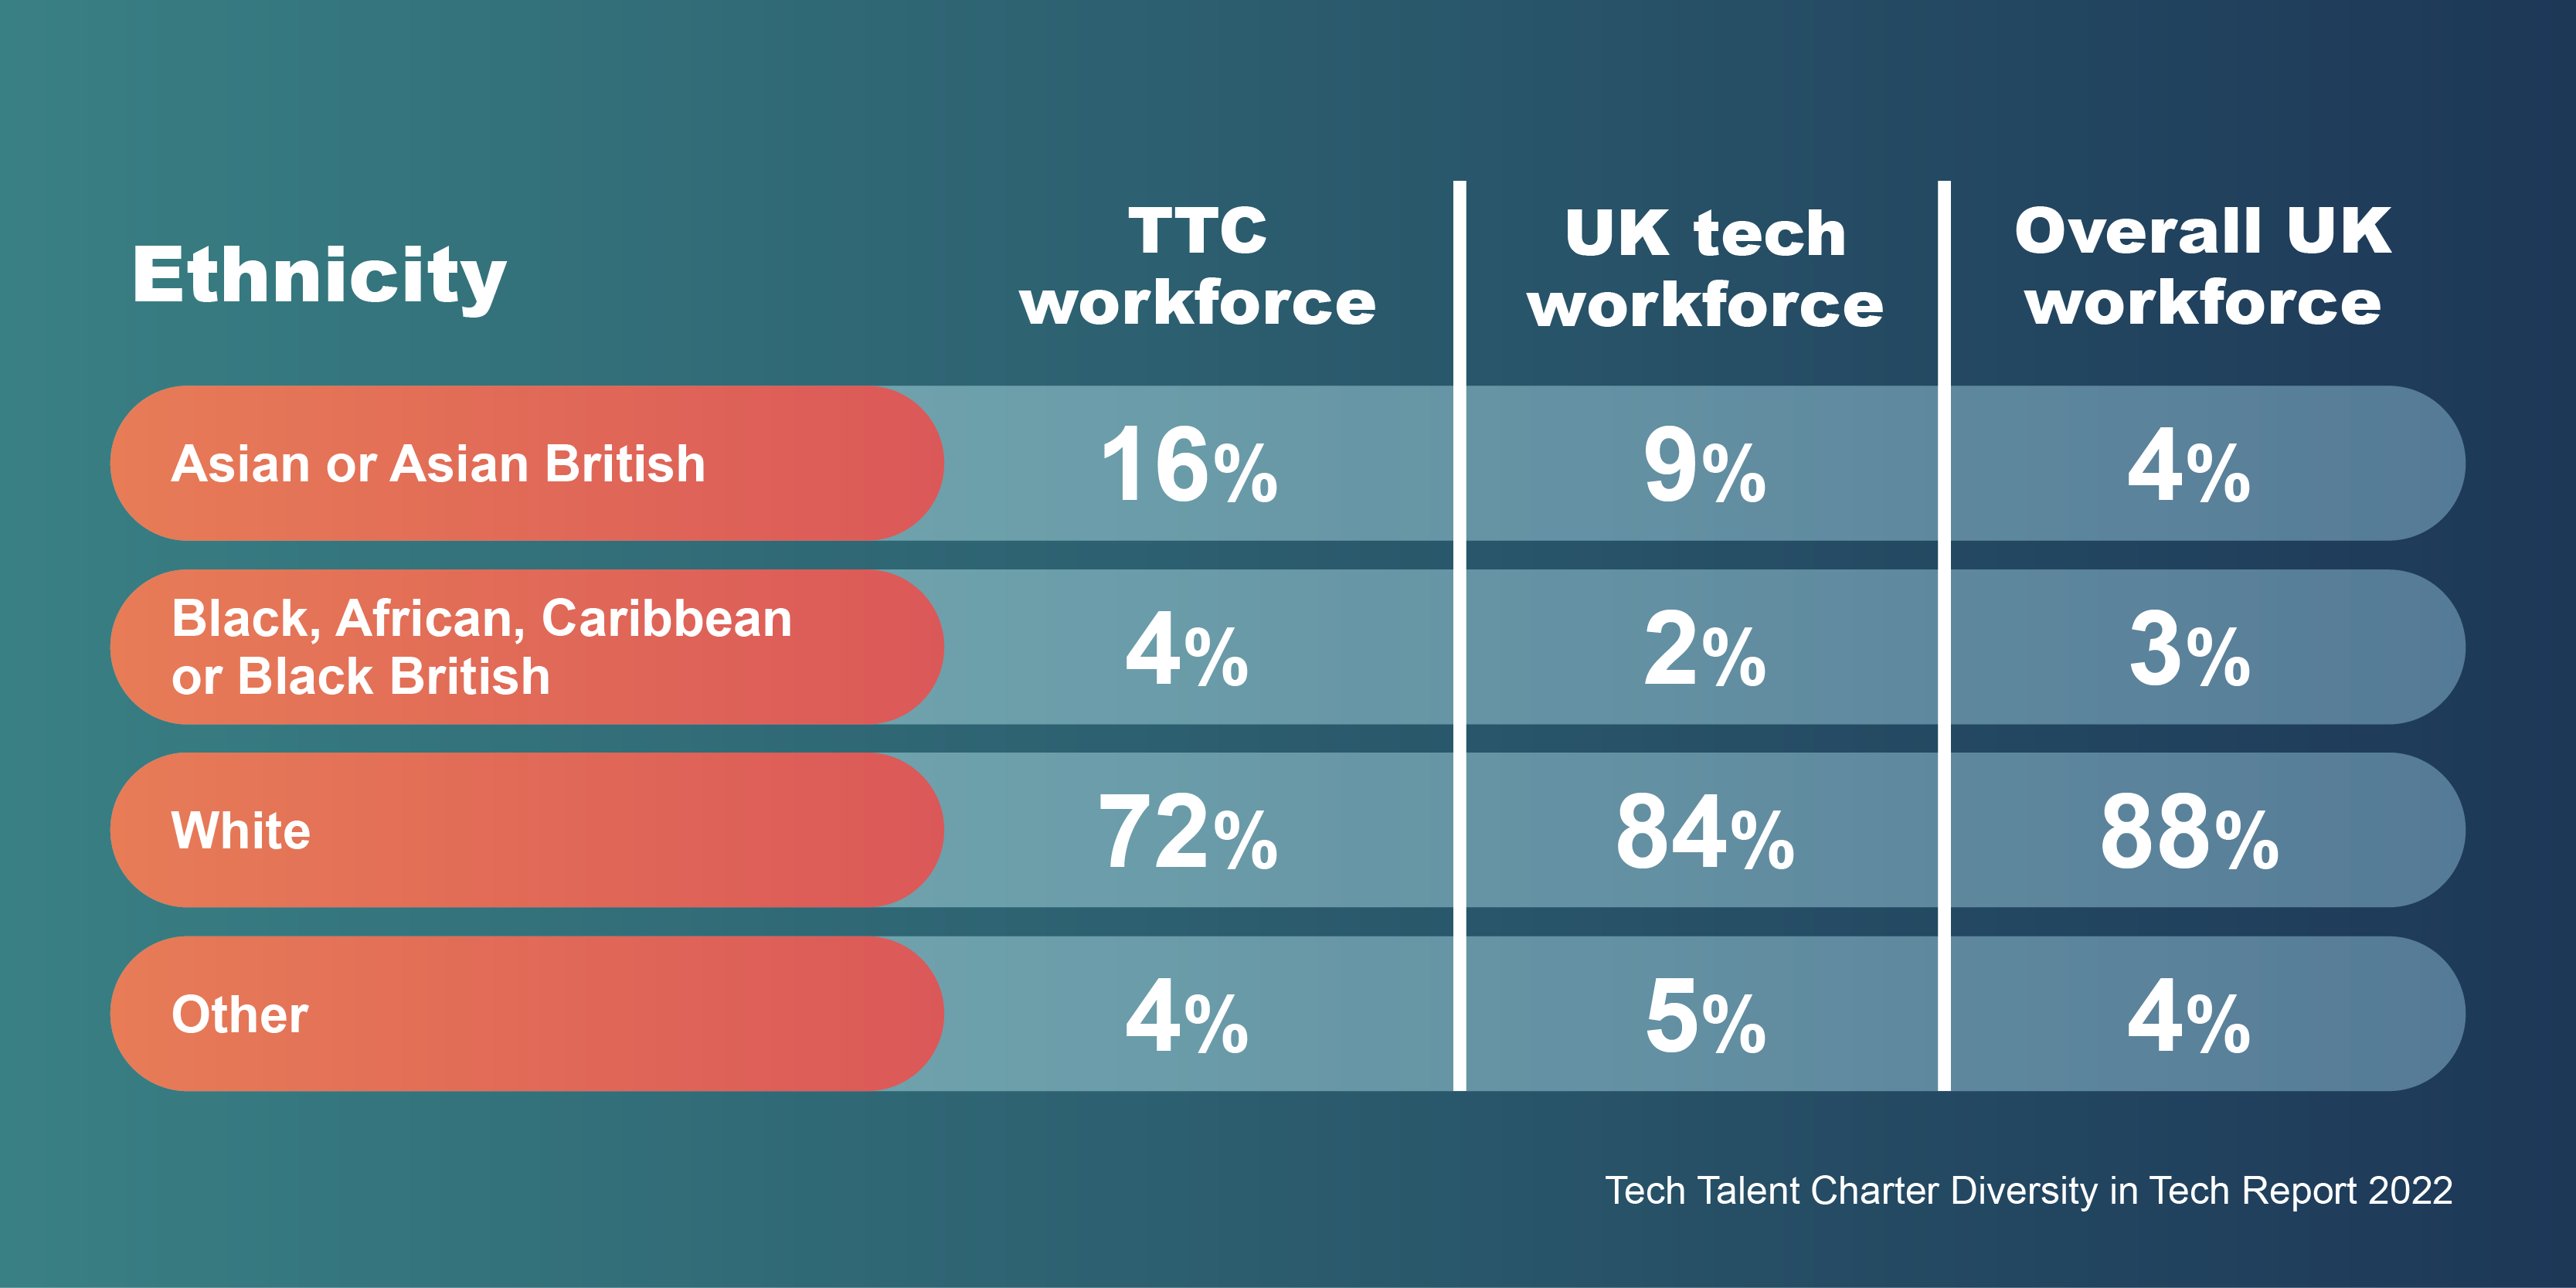 A data table comparing ethnicity in the TTC workforce vs UK tech workforce vs overall UK workforce